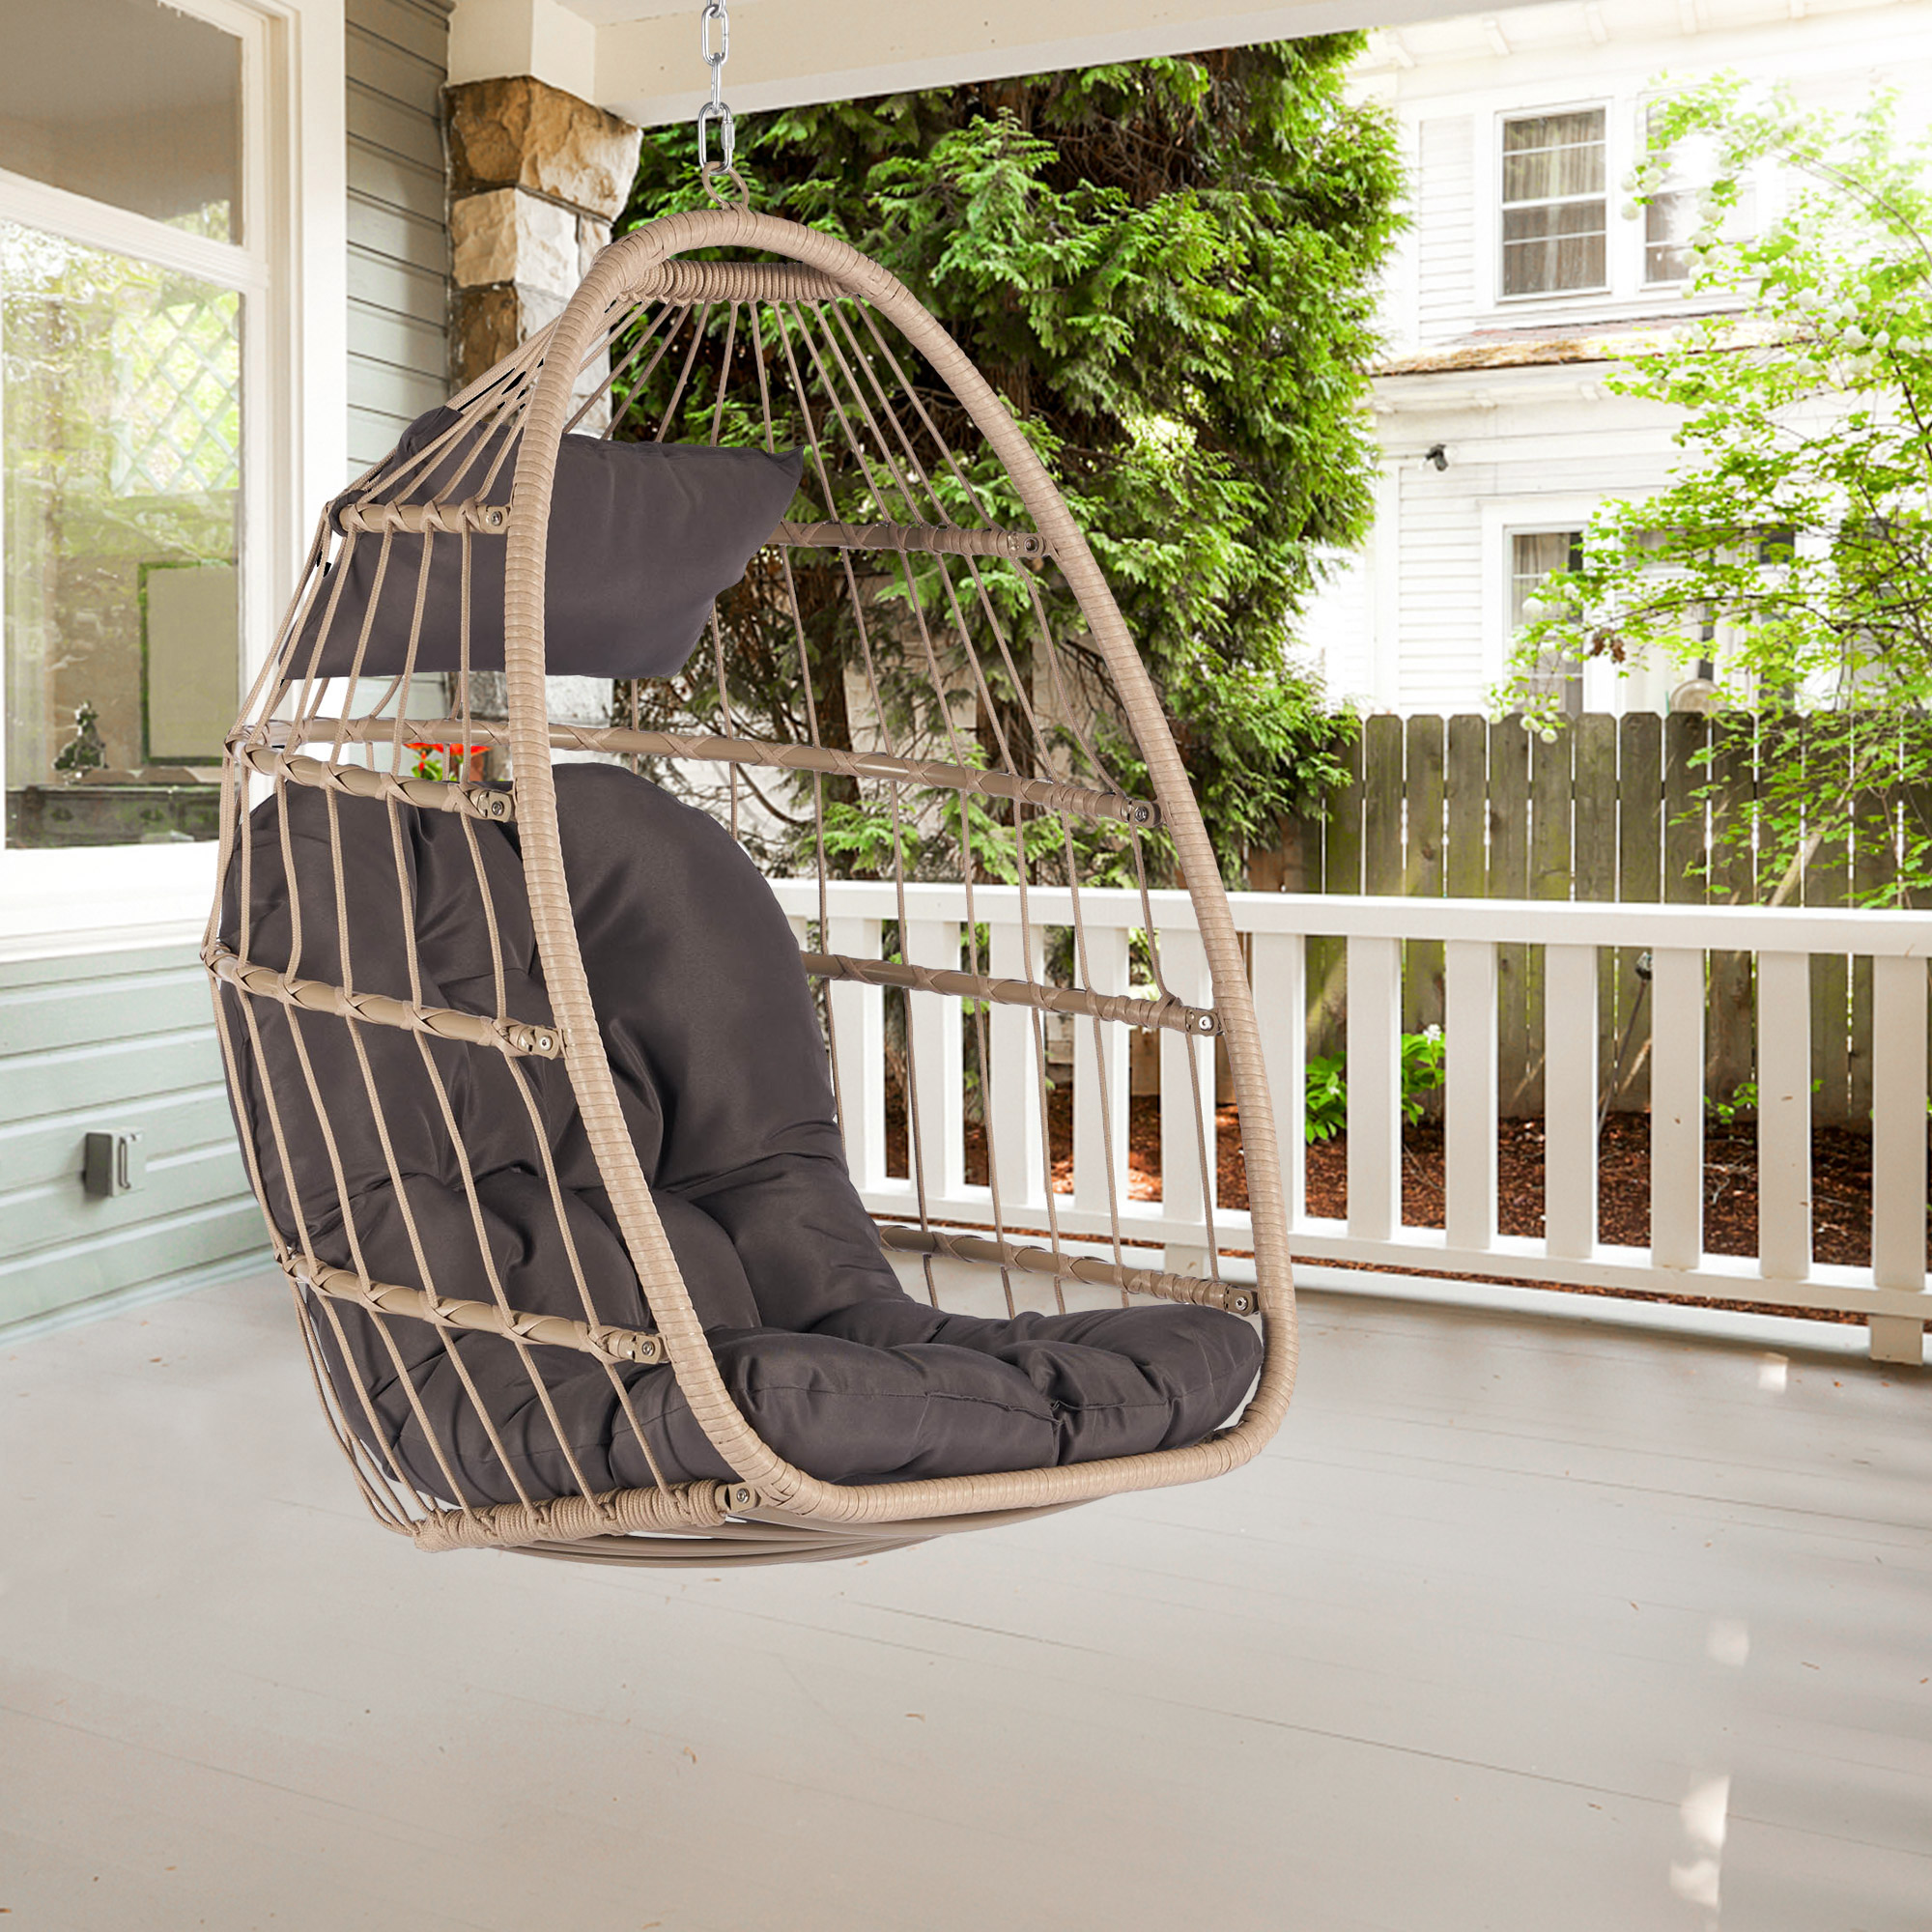 Egg Chair with Hanging Chains, SYNGAR Outdoor All Weather Wicker Hanging Hammock Chair with Dark Gray Cushions, Patio Foldable Basket Swing Chair, for Porch, Balcony, Backyard, Garden, Bedroom, D7708 - image 3 of 10